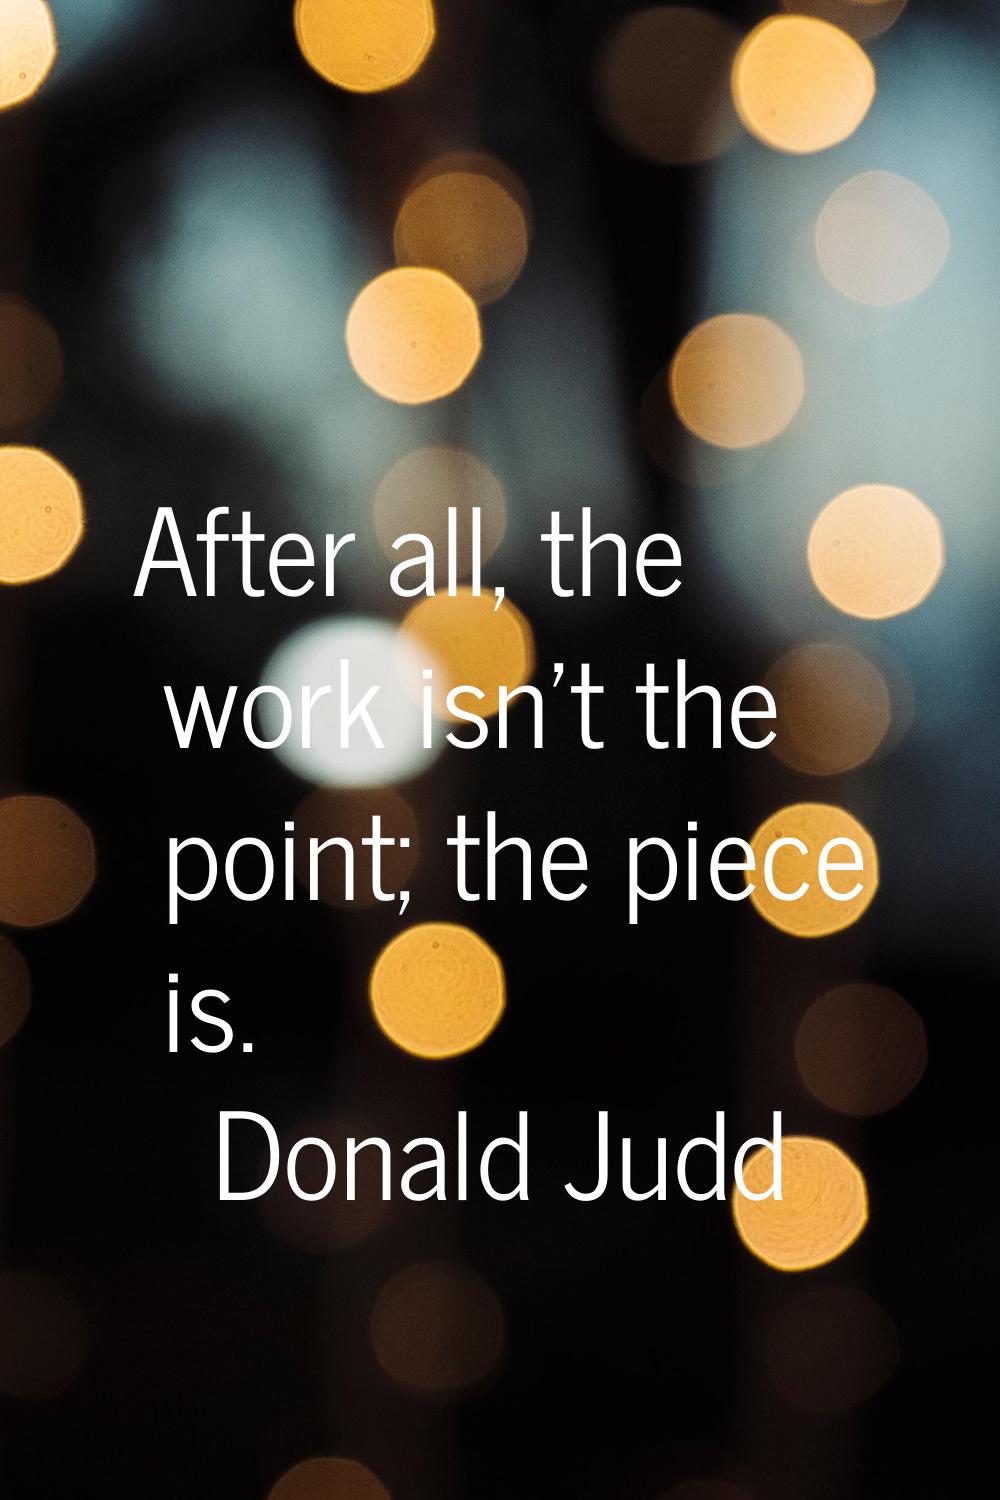 After all, the work isn't the point; the piece is.